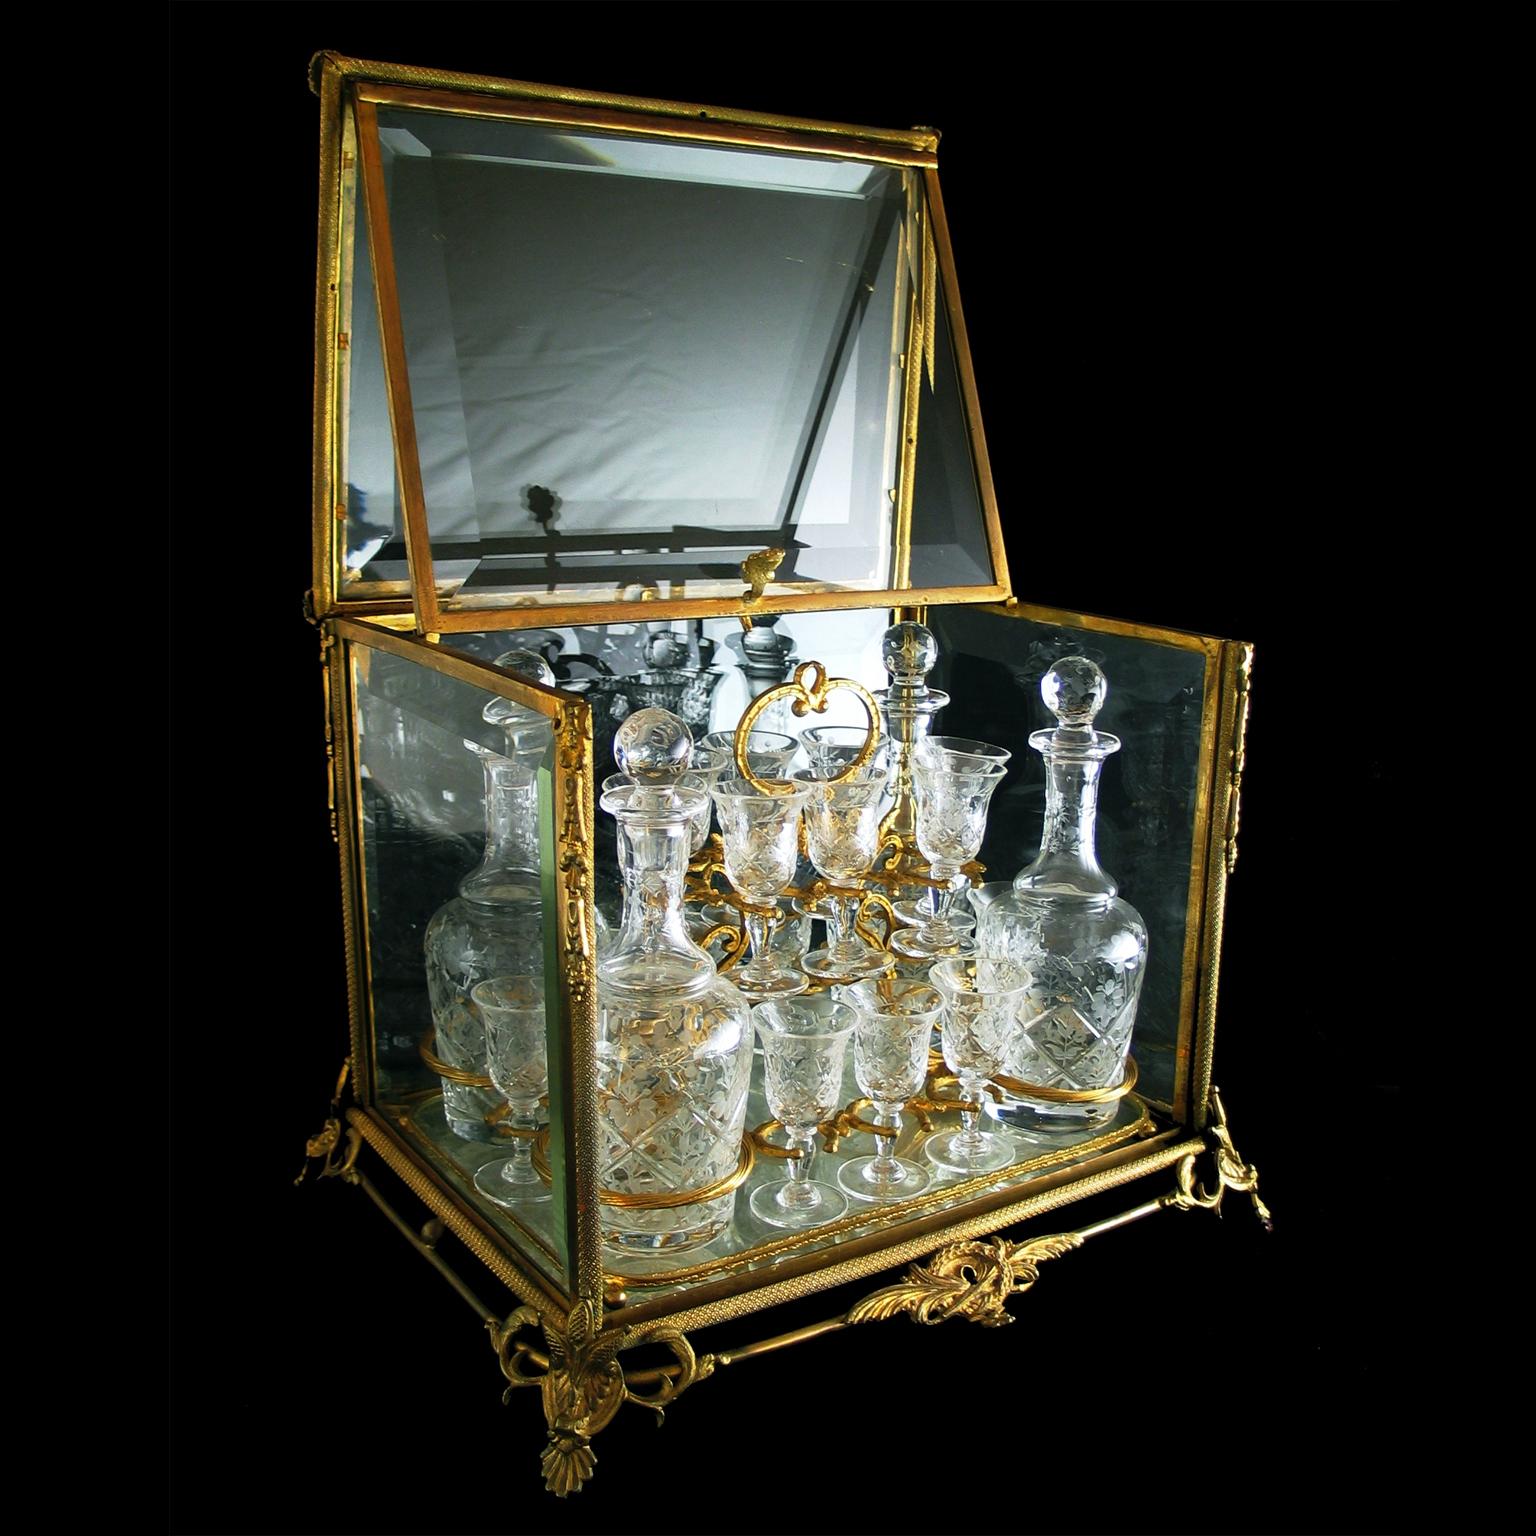 A fine and decorative gilt-bronze and cut-glass decanter set by La Compagnie des Cristalleries de Baccarat.

The set consisting of four decanters and sixteen glasses each finely facet cut and wheel engraved on a lift out gilt-bronze and mirrored